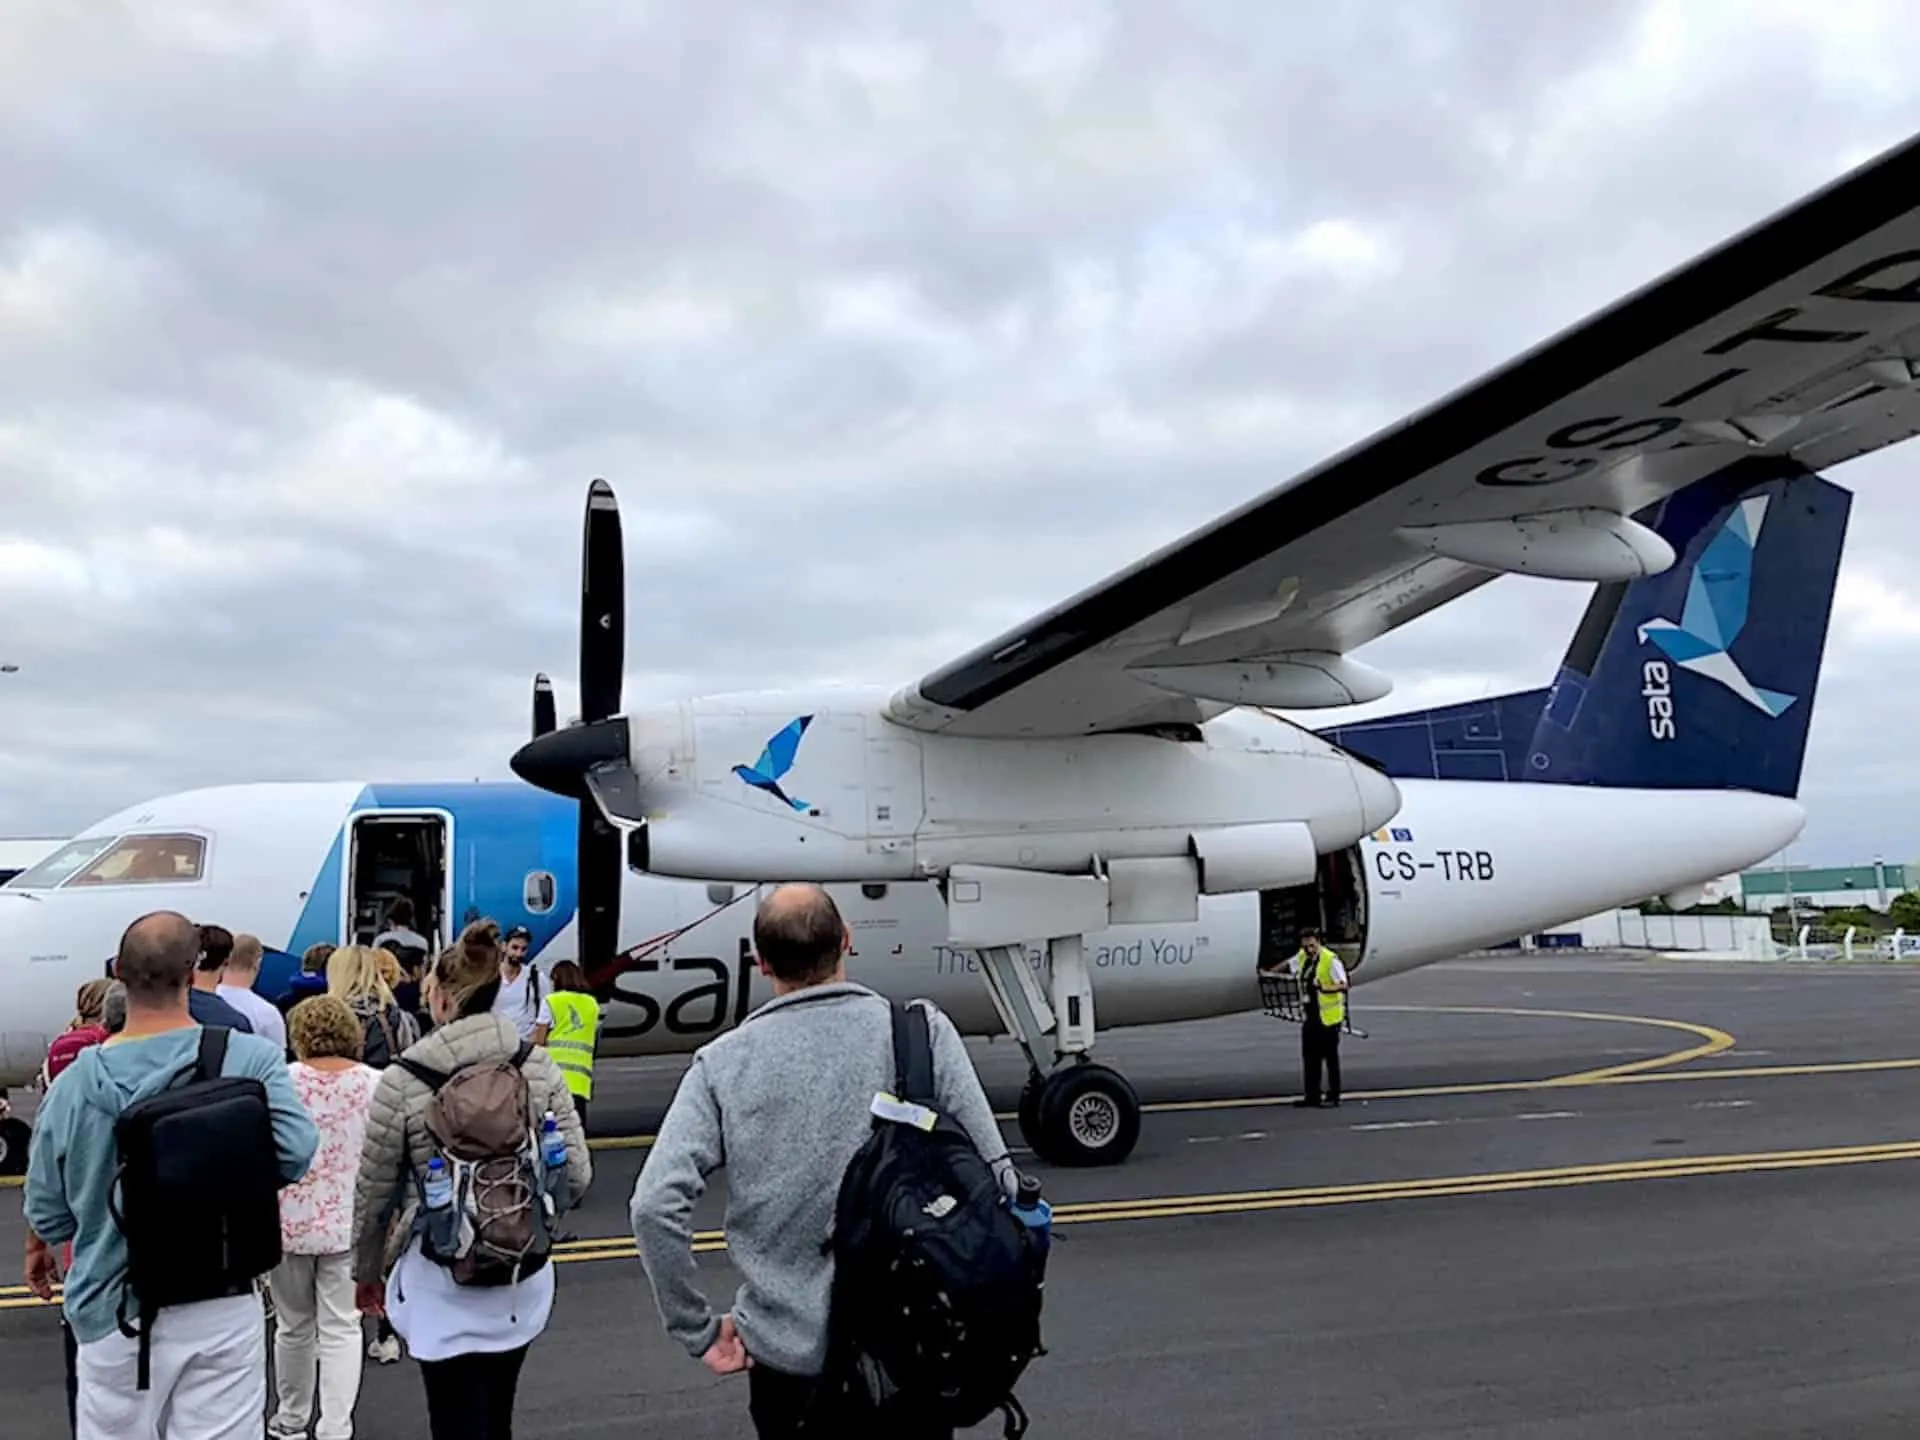 Azores Flying Guide